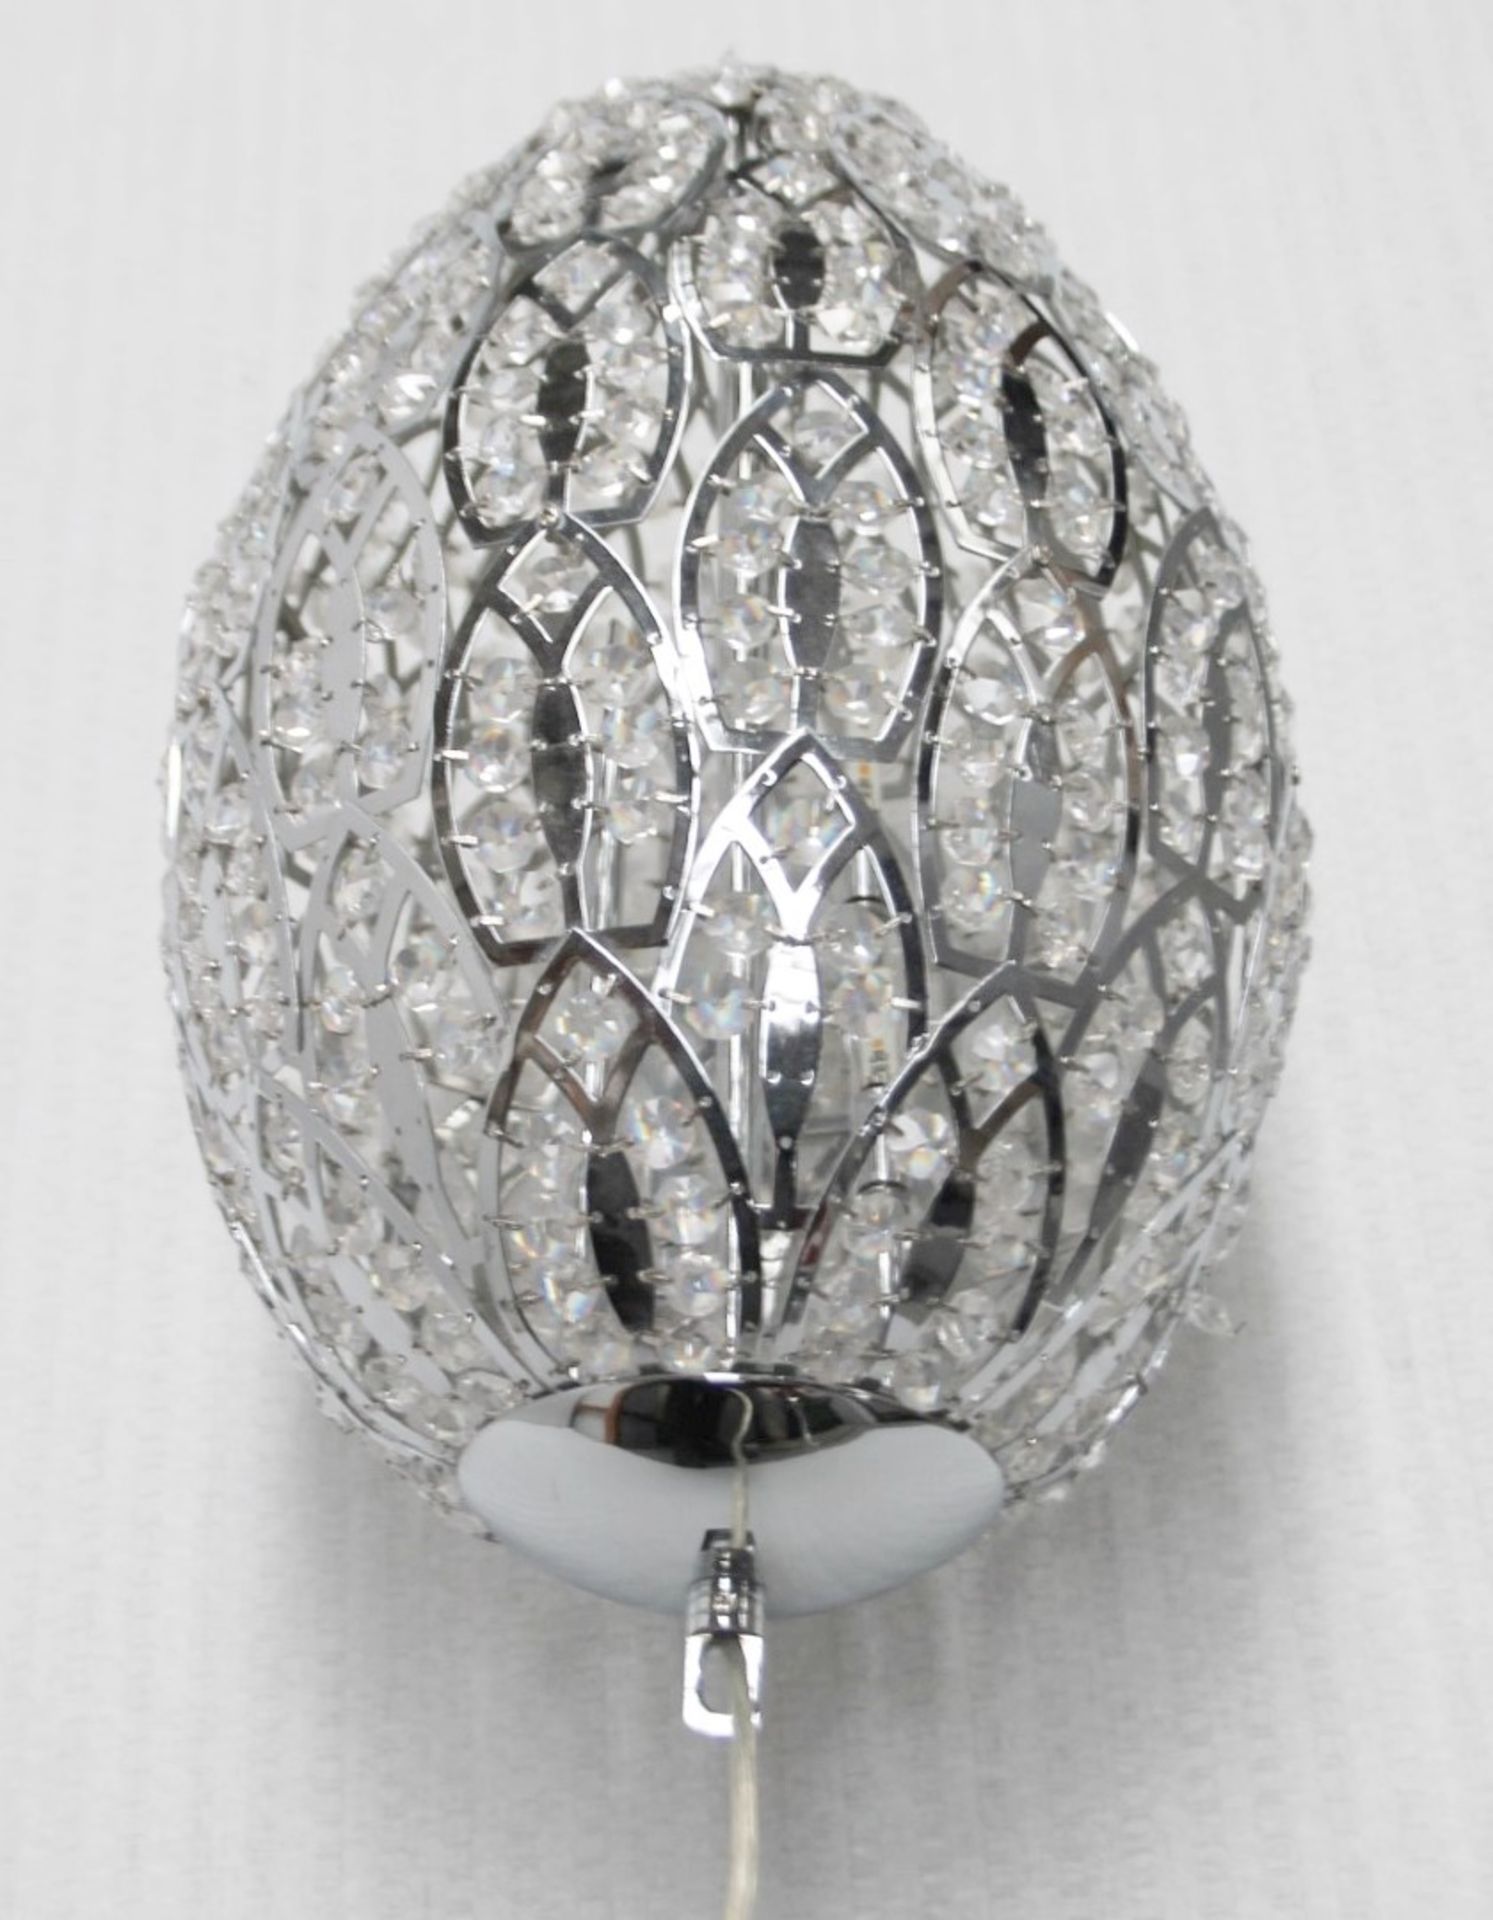 1 x High-end Italian LED Egg-Shaped Light Fitting Encrusted In Premium ASFOUR Crystal - RRP £4,000 - Image 4 of 9